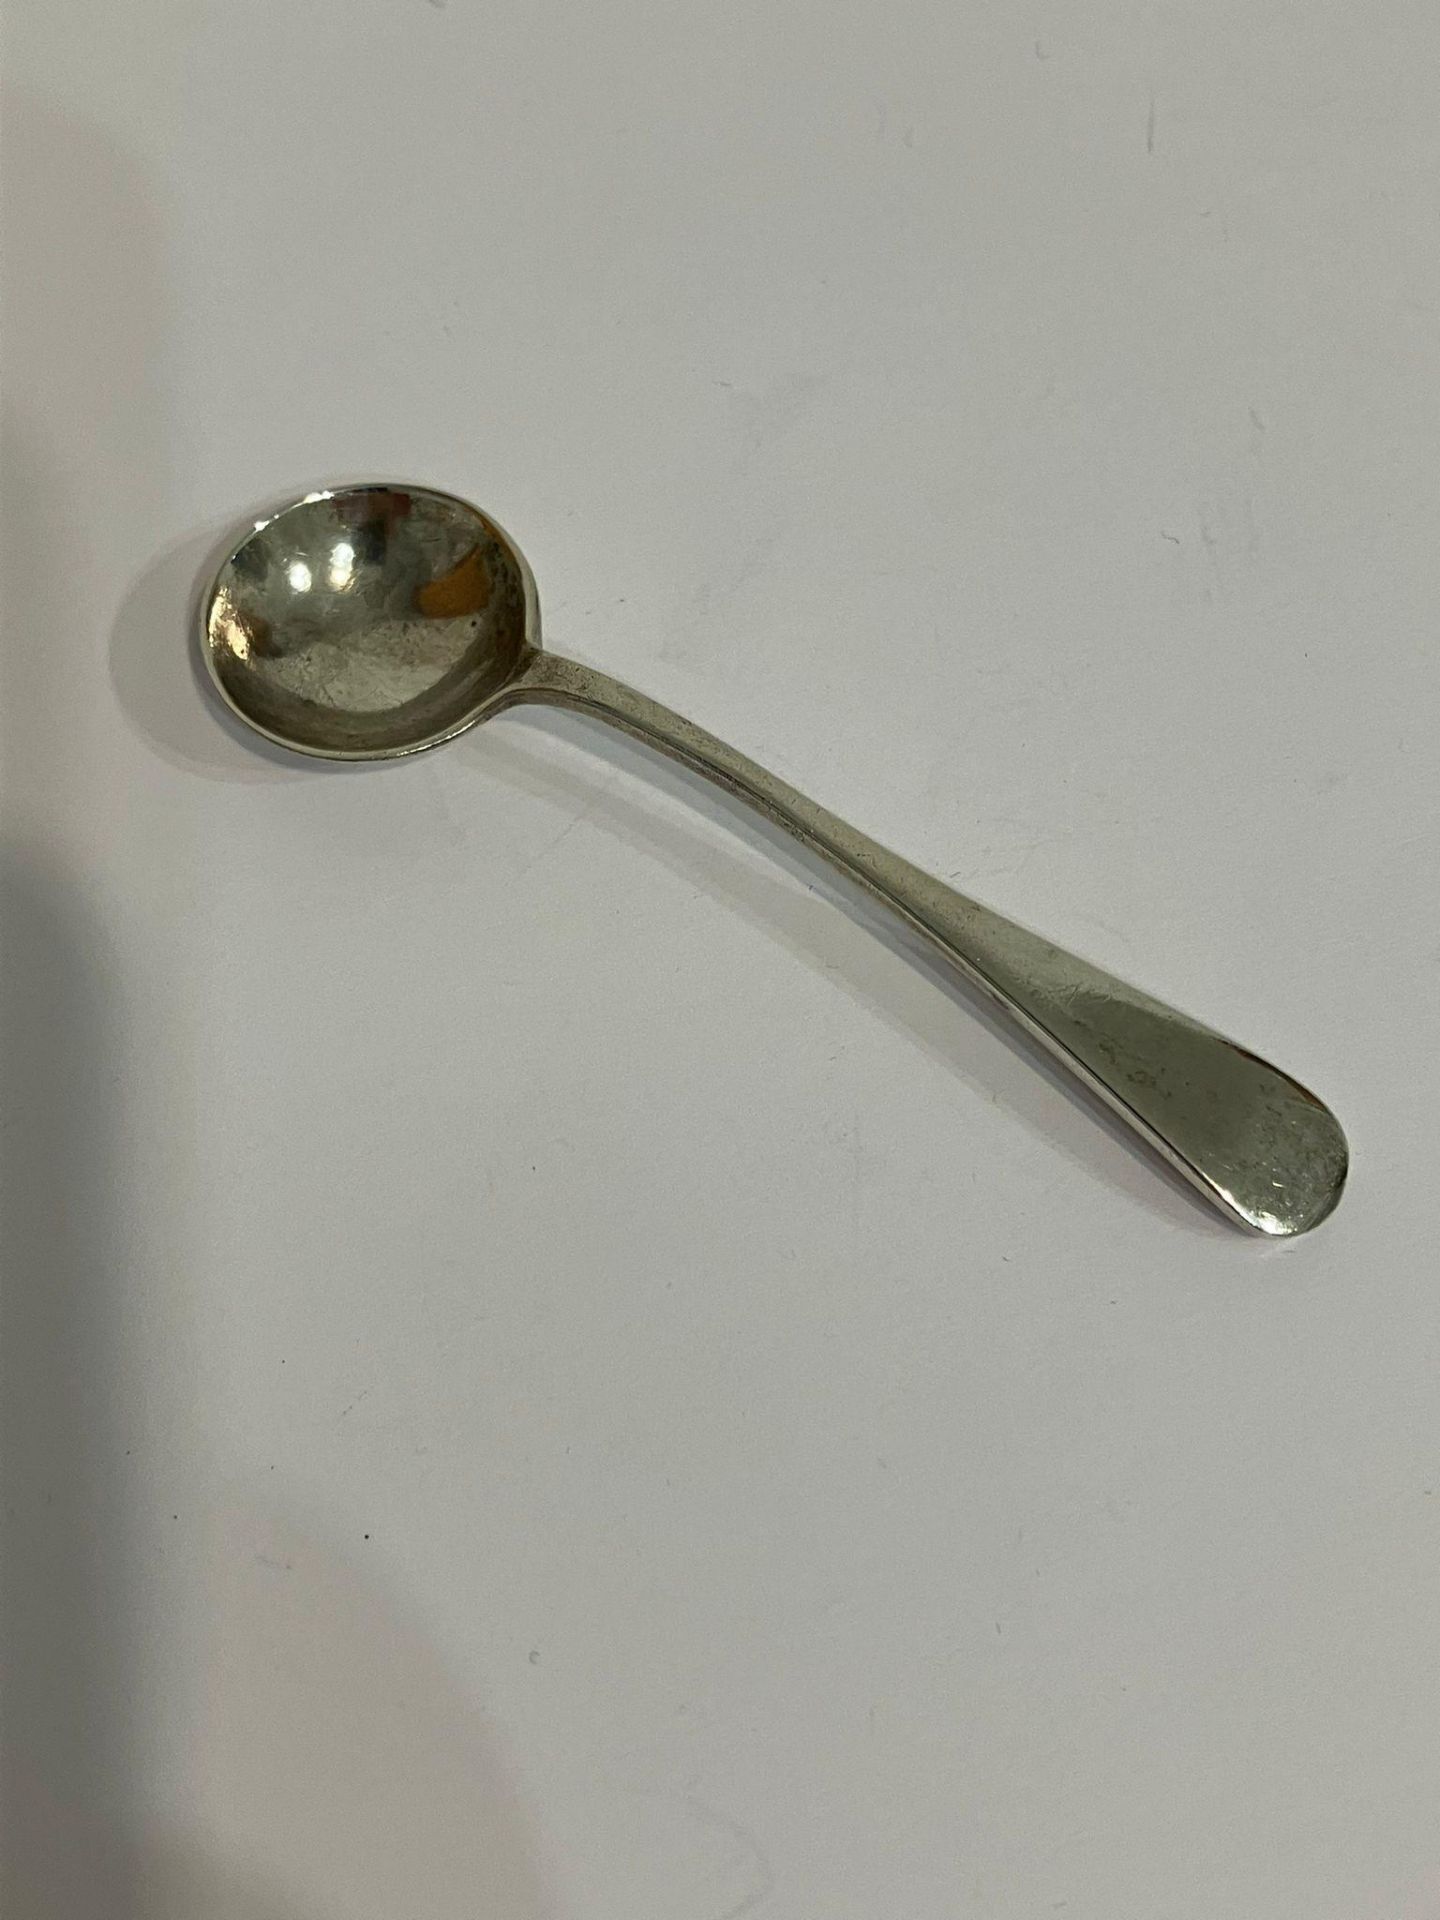 Antique SILVER SALT SPOON with clear hallmark For Stokes and Ireland, Chester 1919. Having deep ‘